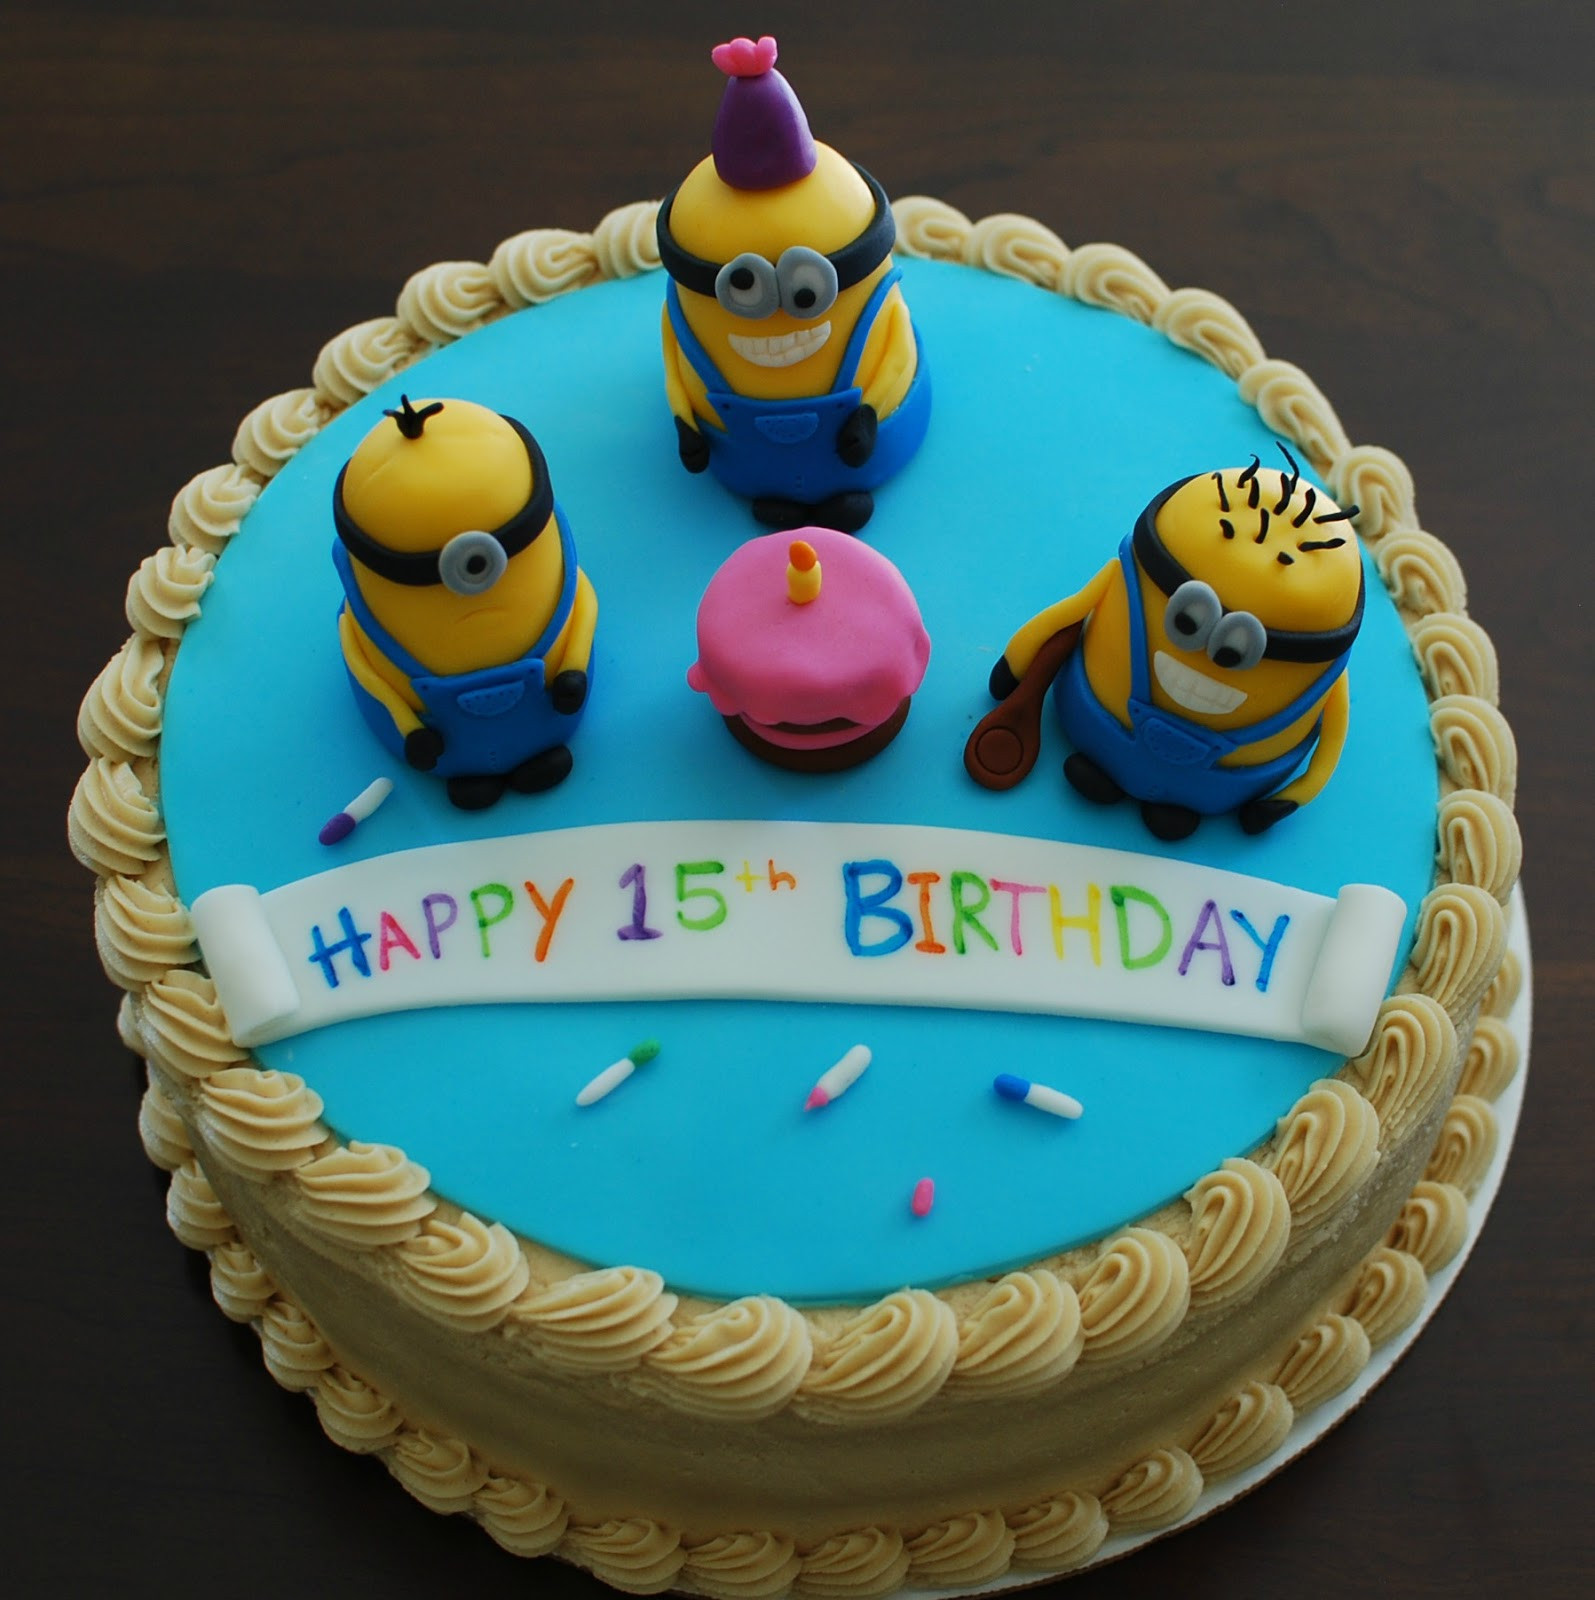 Despicable Me Birthday Cake
 Snacky French Despicable Me Cake plus some behind the